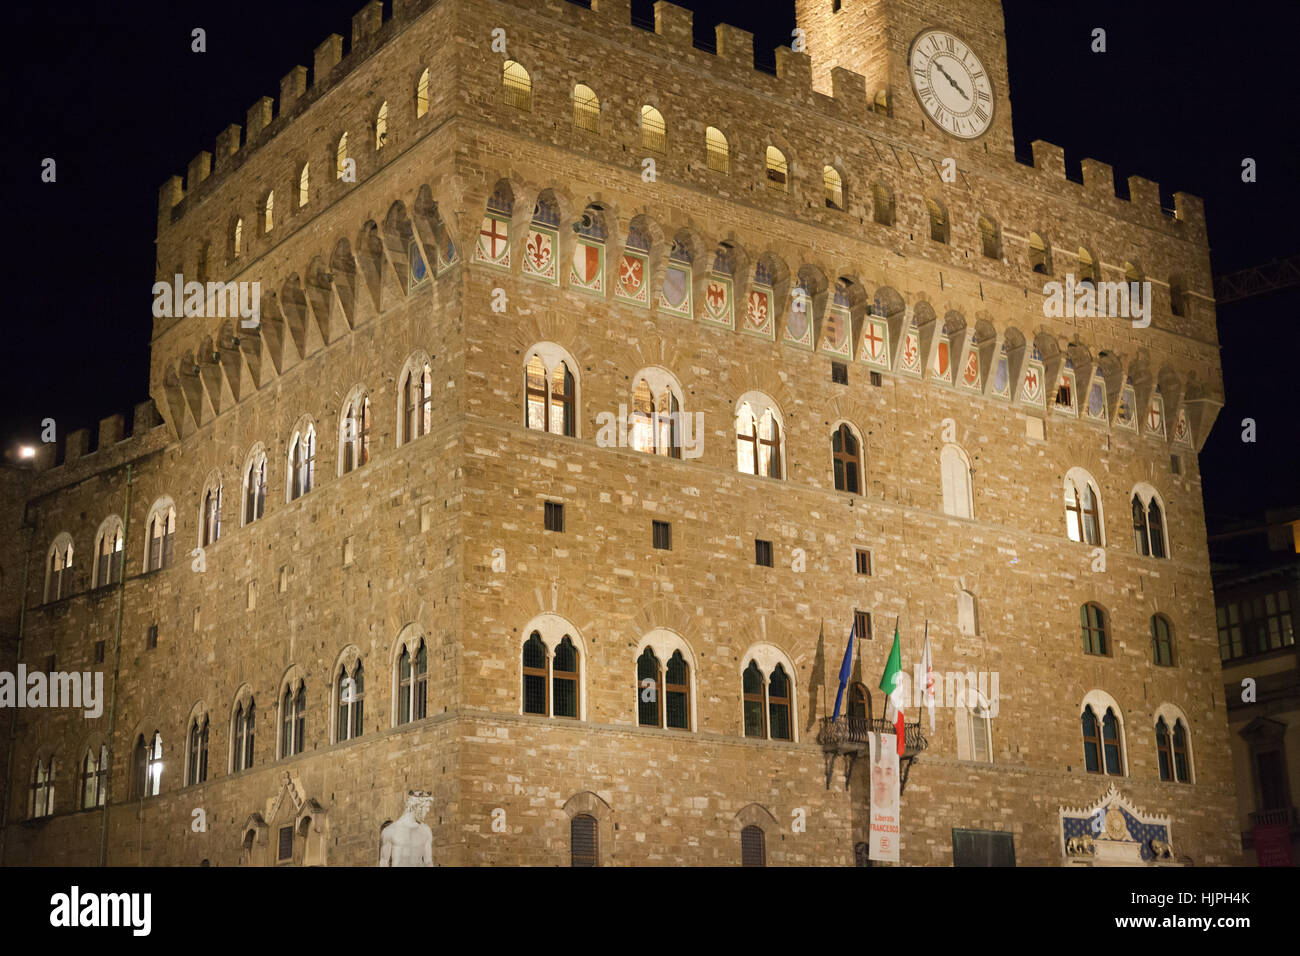 tuscany, florence, piazza, tower, travel, statue, dome, night, nighttime, Stock Photo